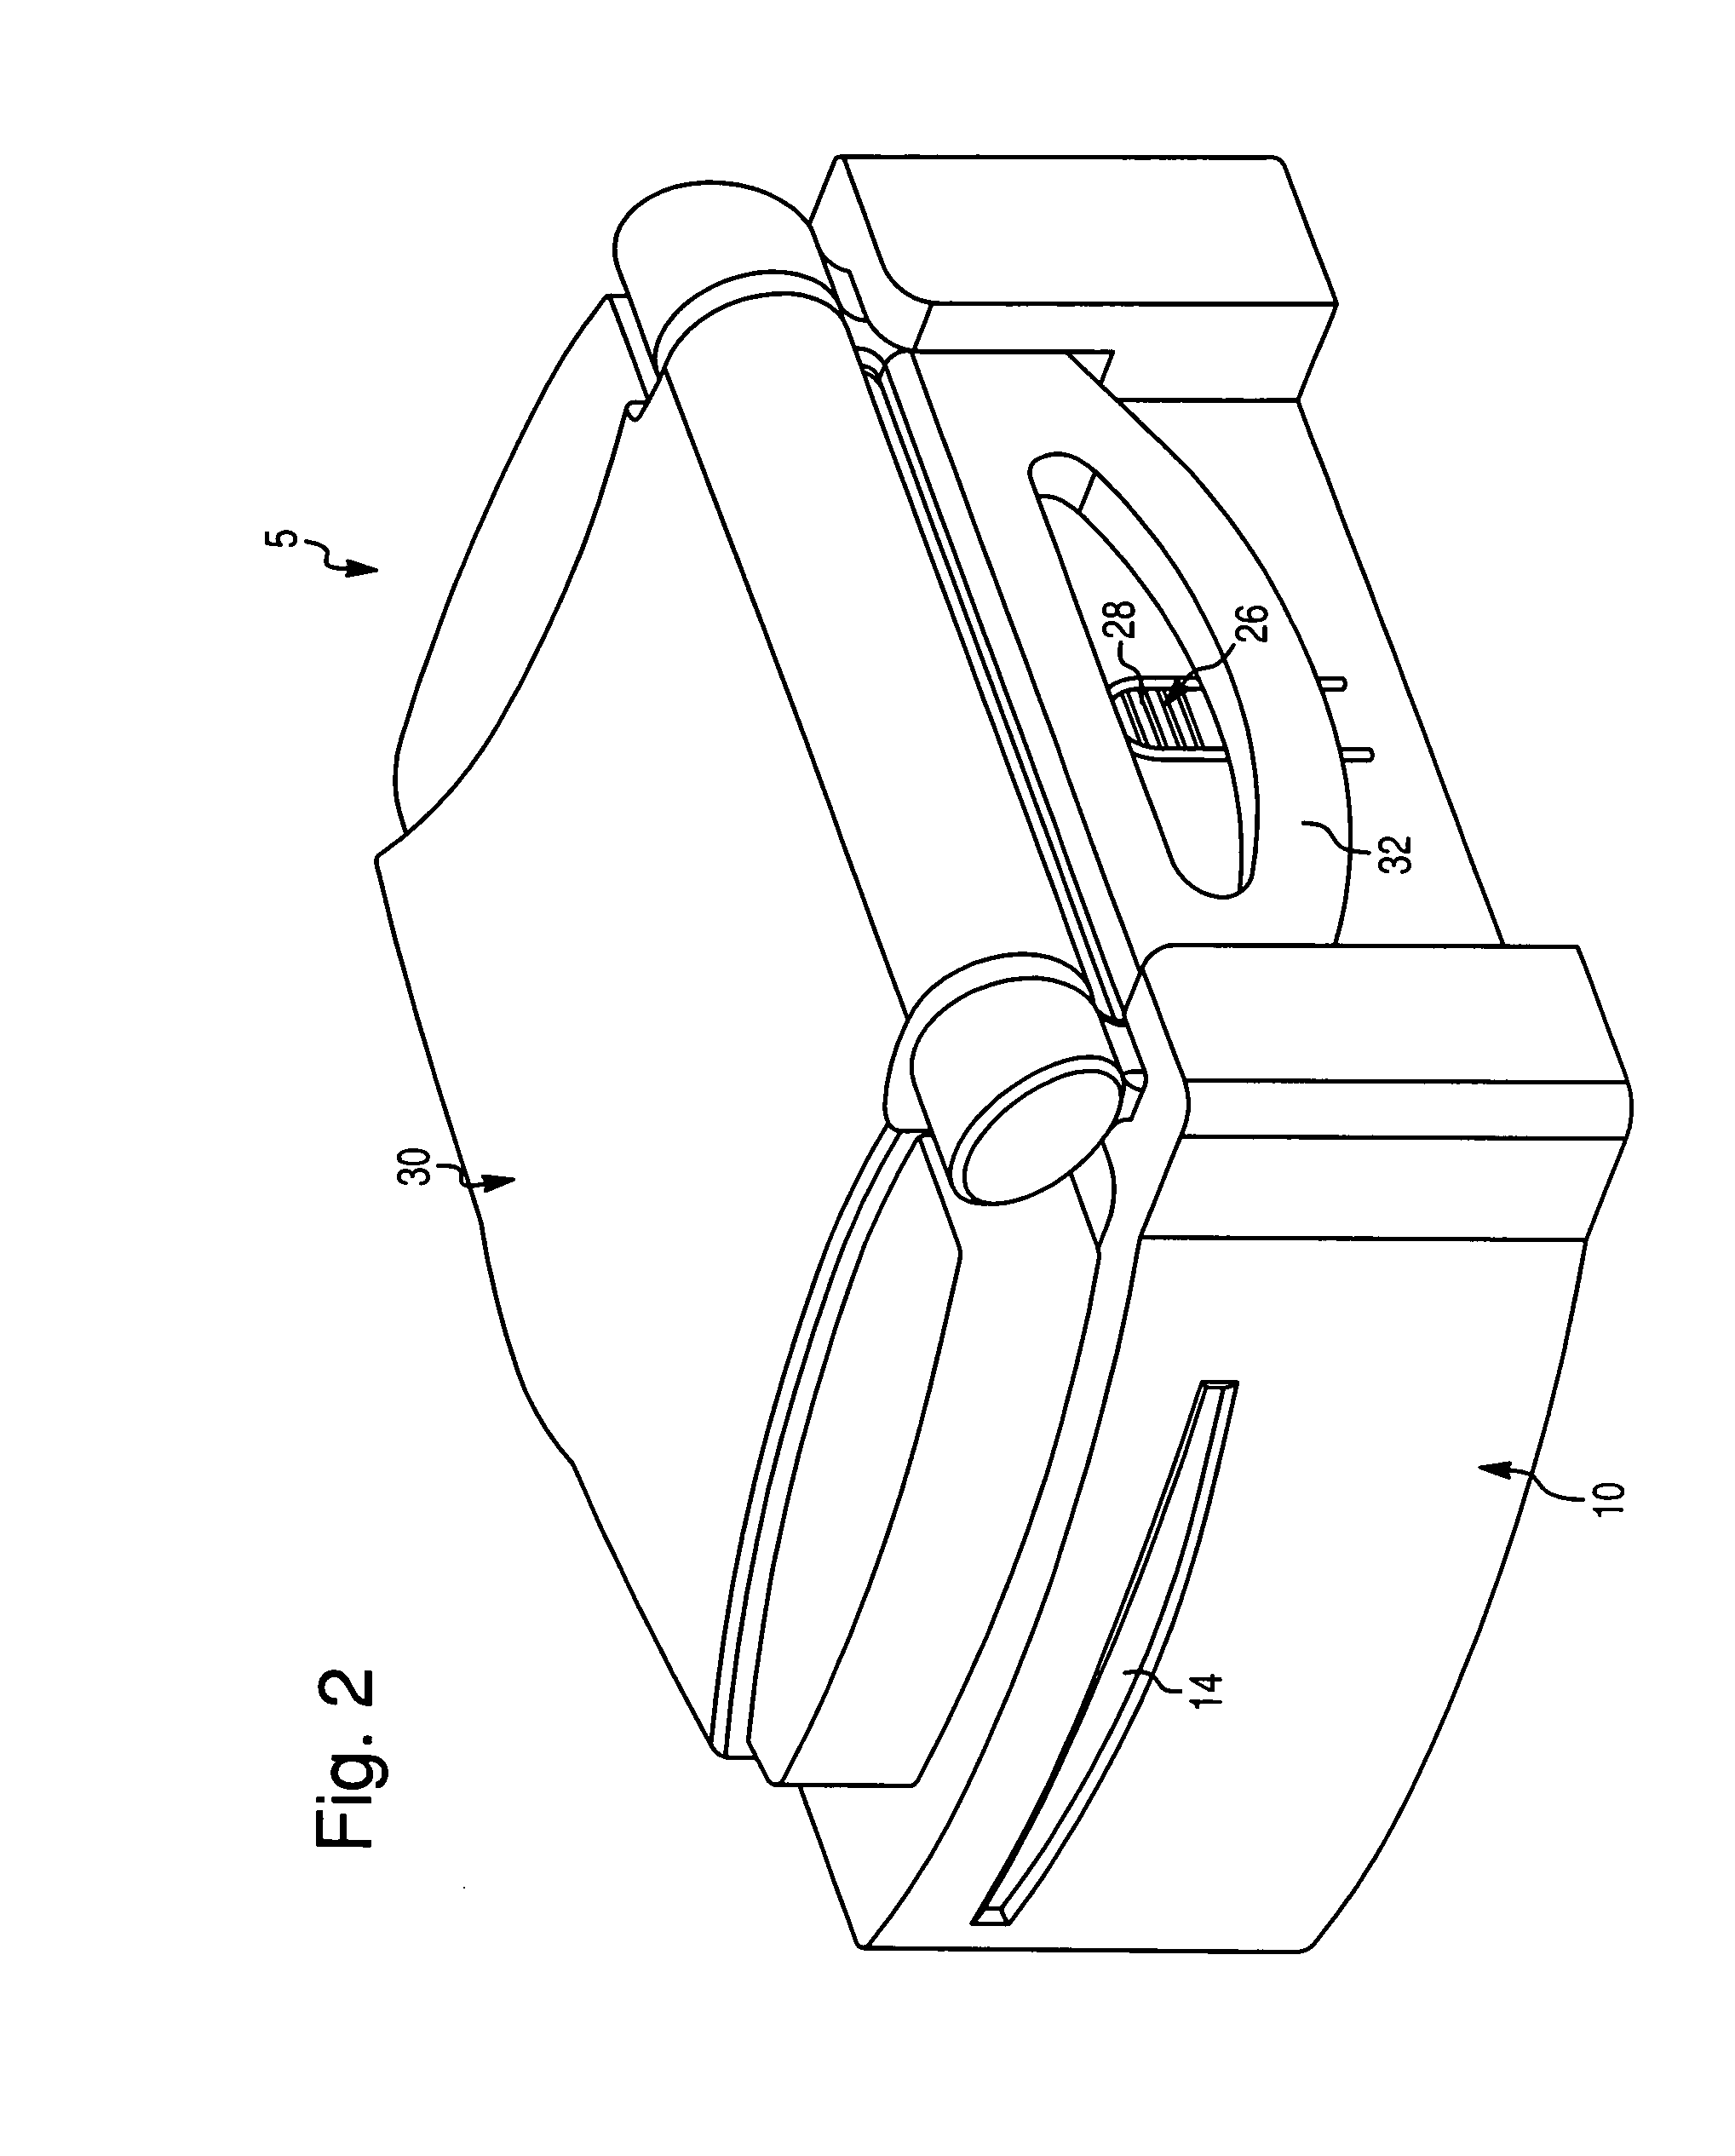 Mounting kit for releasably securing portable video player device and/or detachable display unit to vehicle seat